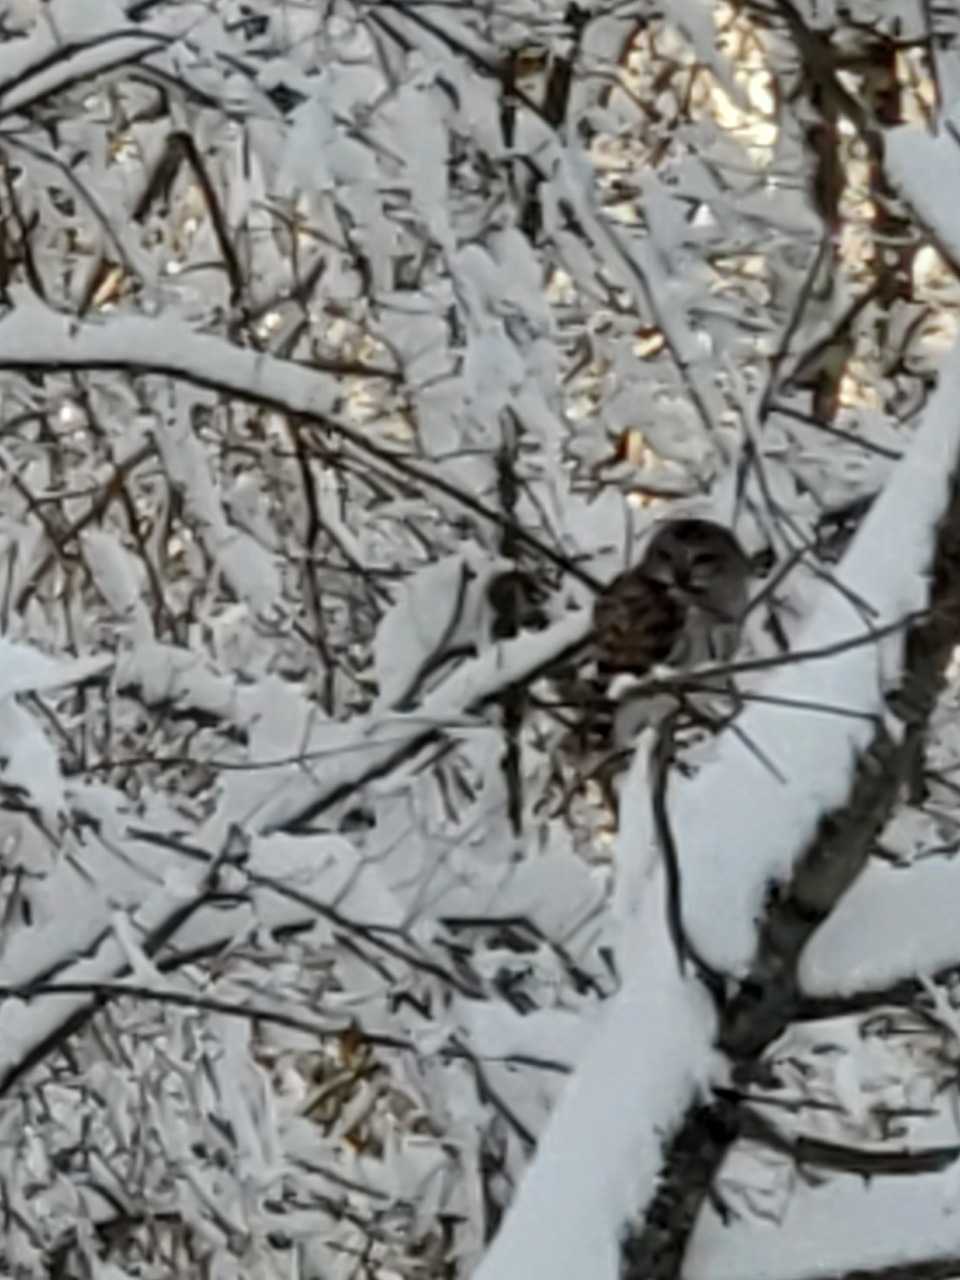 Northern Barred Owl in a snowy tree